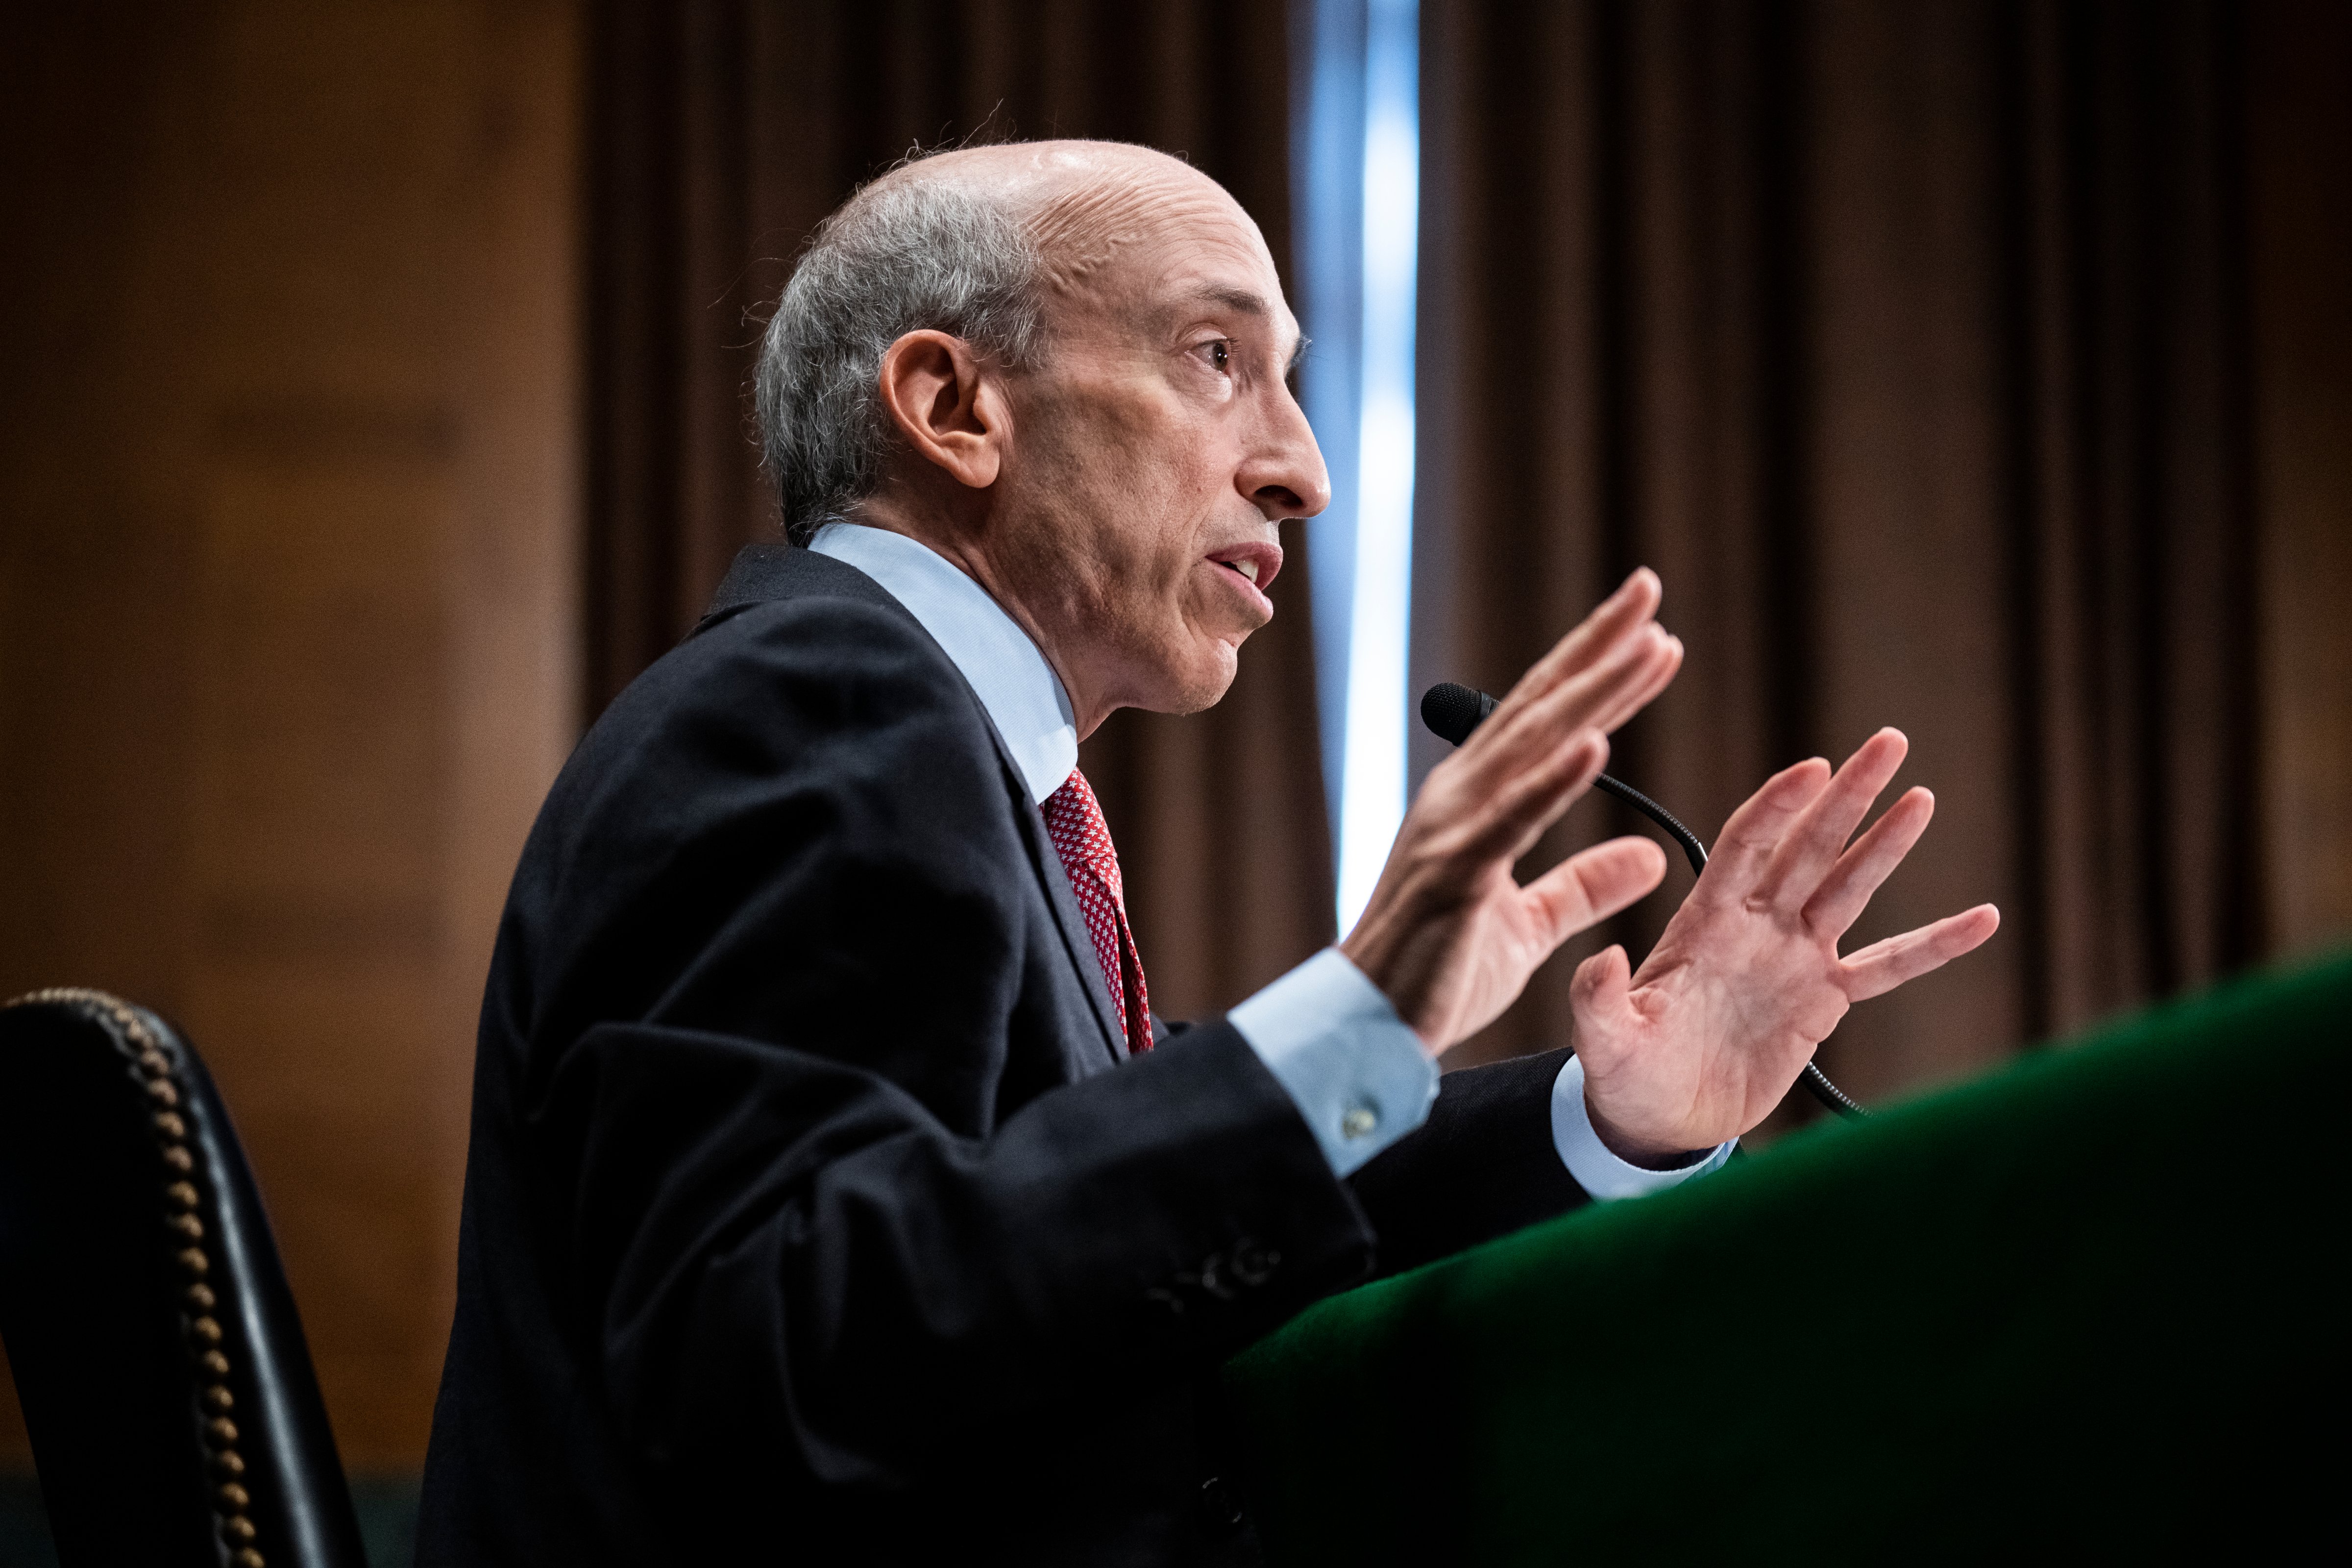 SEC Chair Gary Gensler in Washington, D.C. in September 2022. (Tom Williams/CQ-Roll Call, Inc--Getty Images)